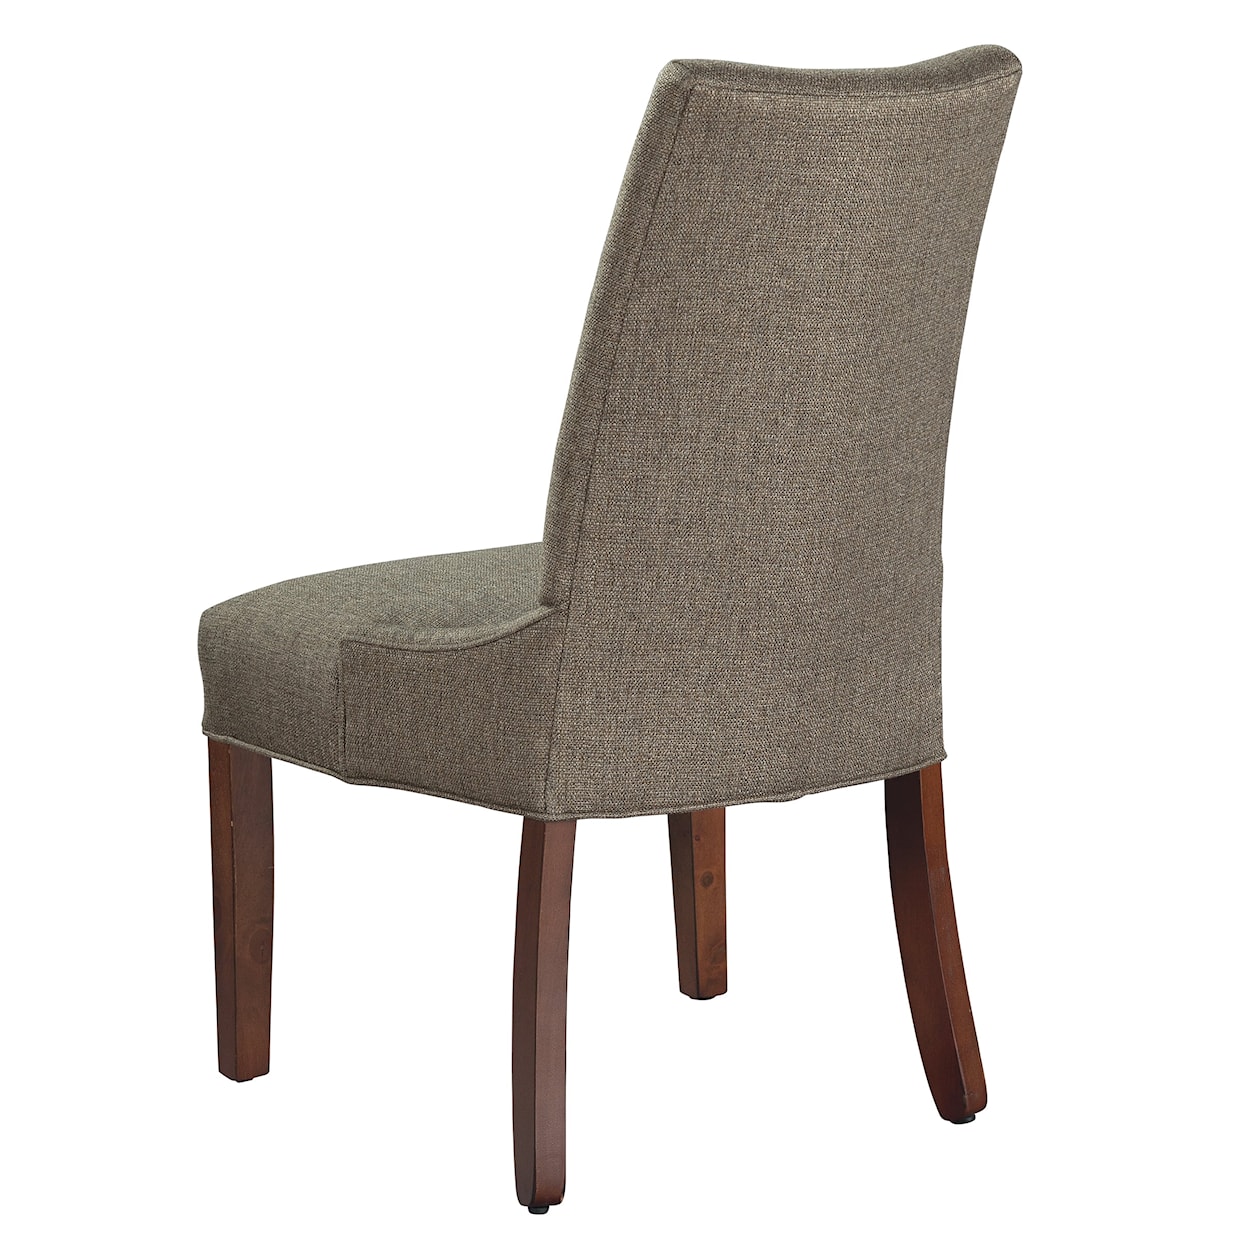 Hekman Upholstery Chester Dining Chair